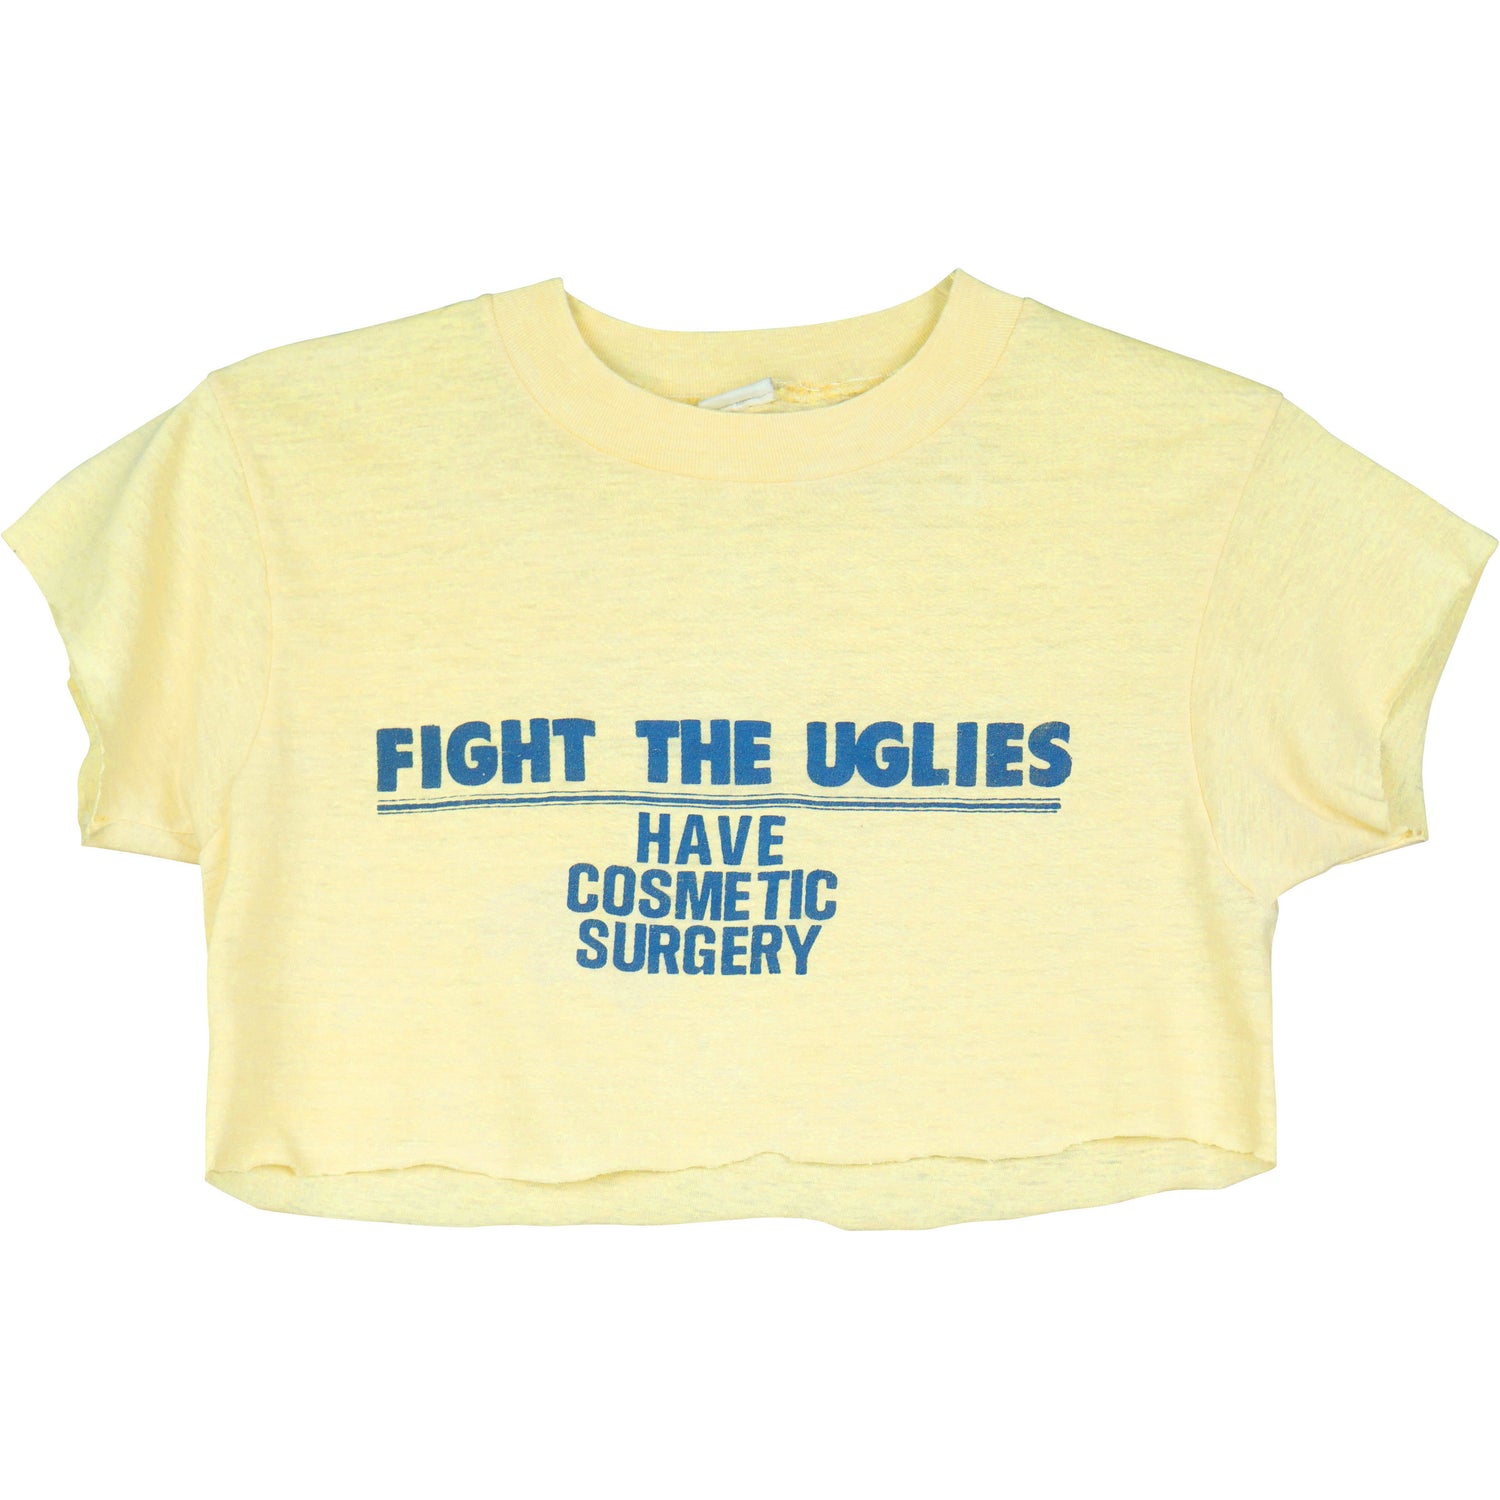 VINTAGE FIGHT THE UGLIES T-SHIRT